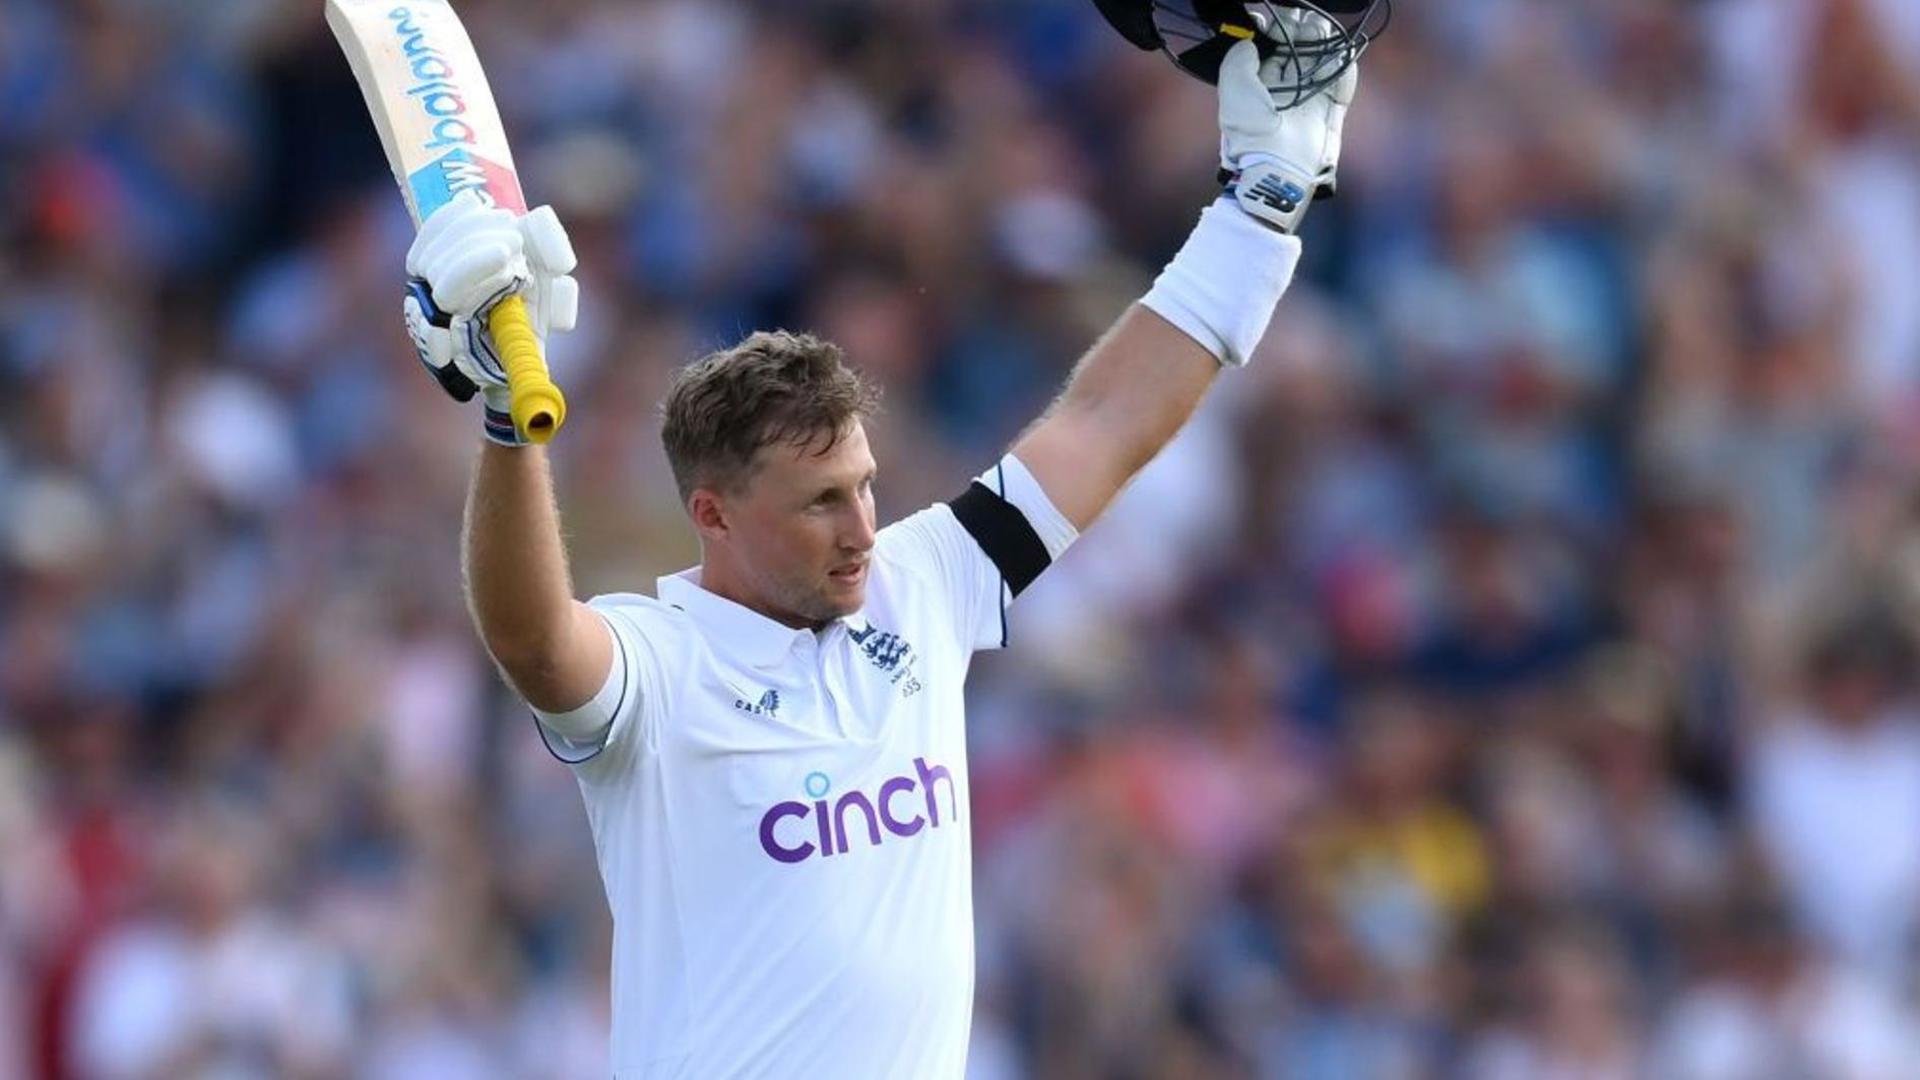 Joe Root amasses second-most Test runs before getting stumped: Stats